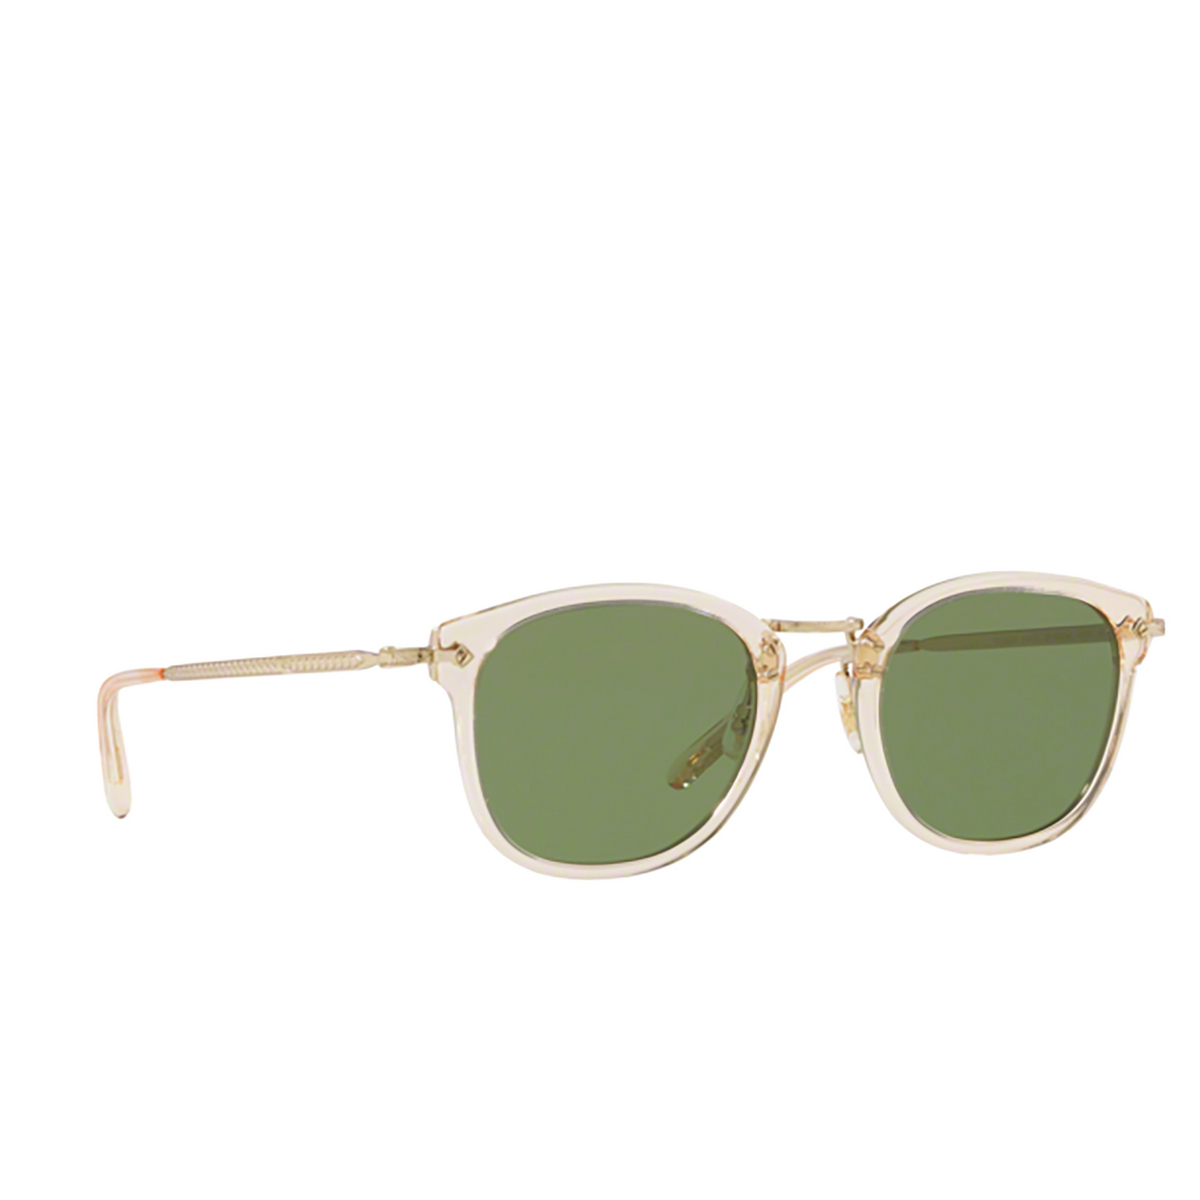 Oliver Peoples OP-506 Sunglasses 109452 Buff - three-quarters view